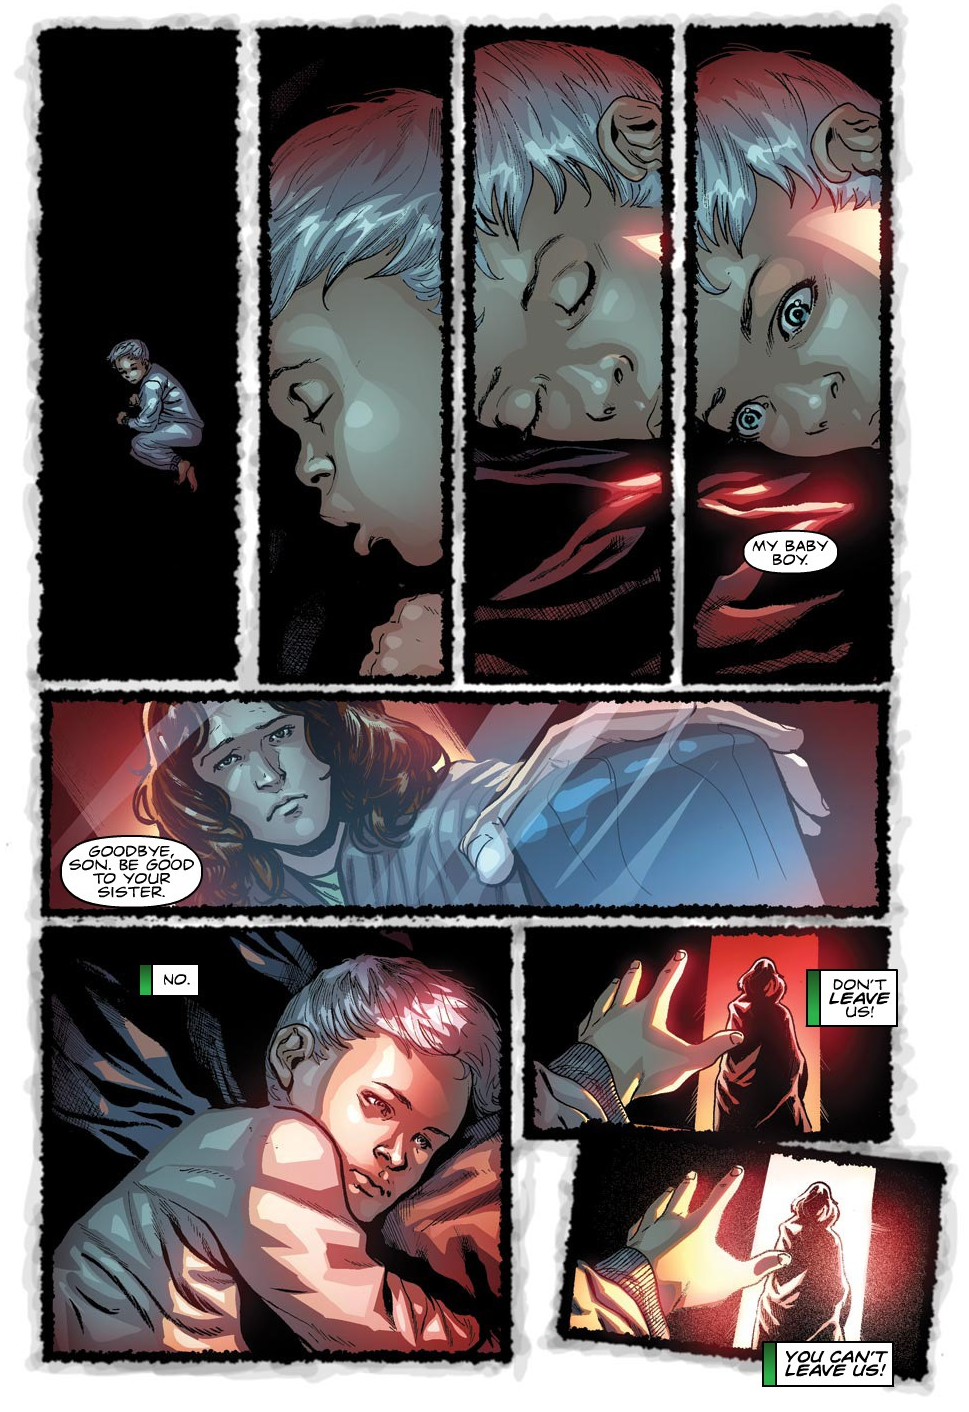 Imperius Rex — Quicksilver & Scarlet Witch in Avengers #94